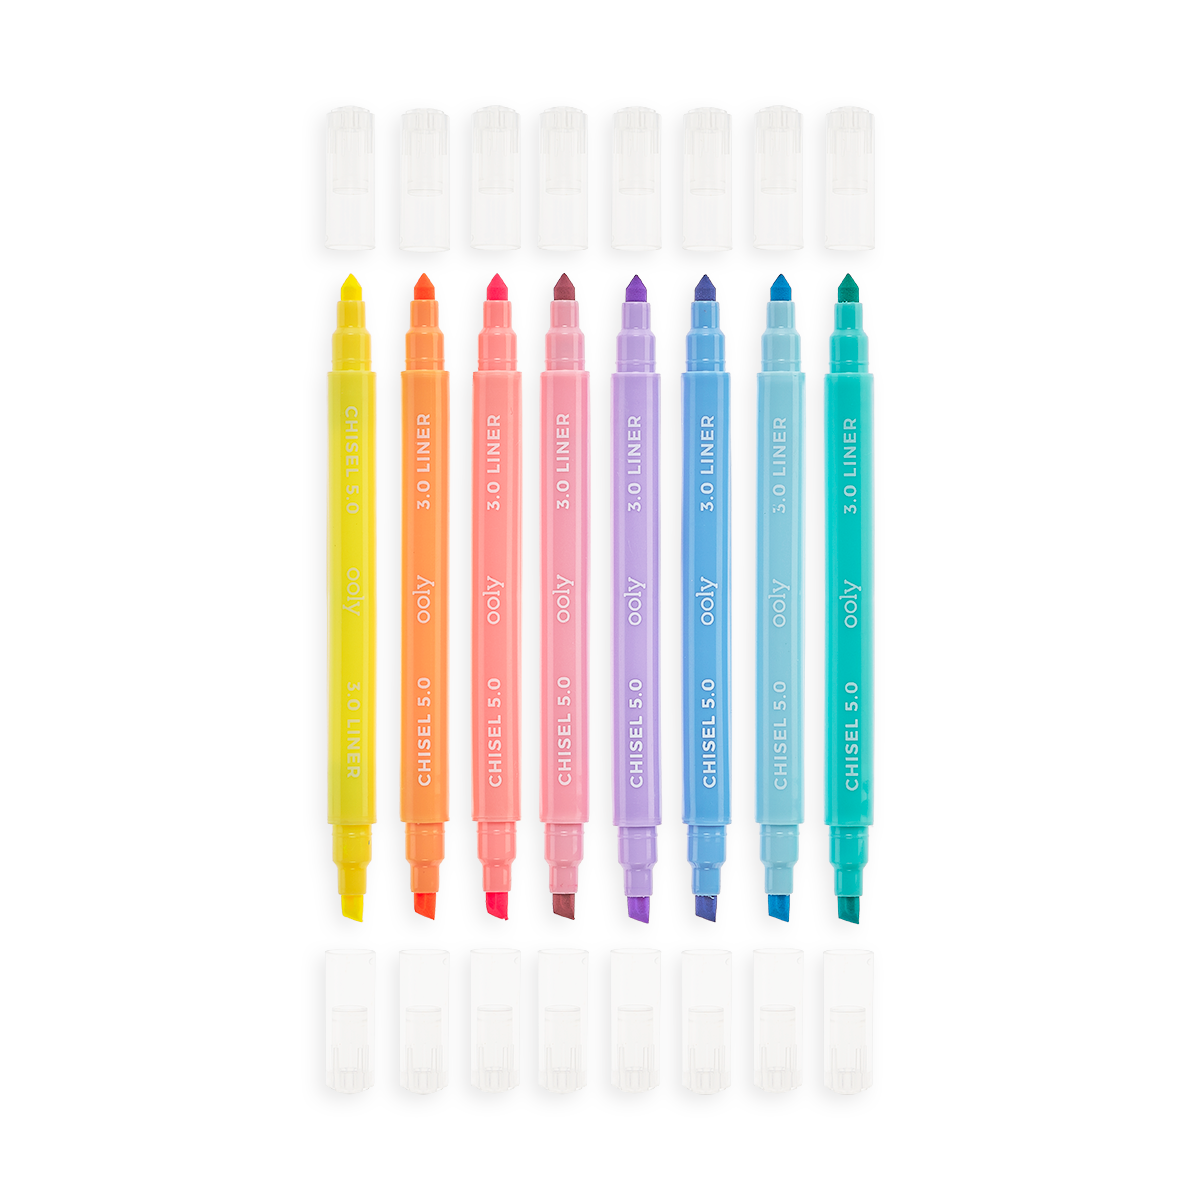 Pastel Liner markers lined up in a row with caps off